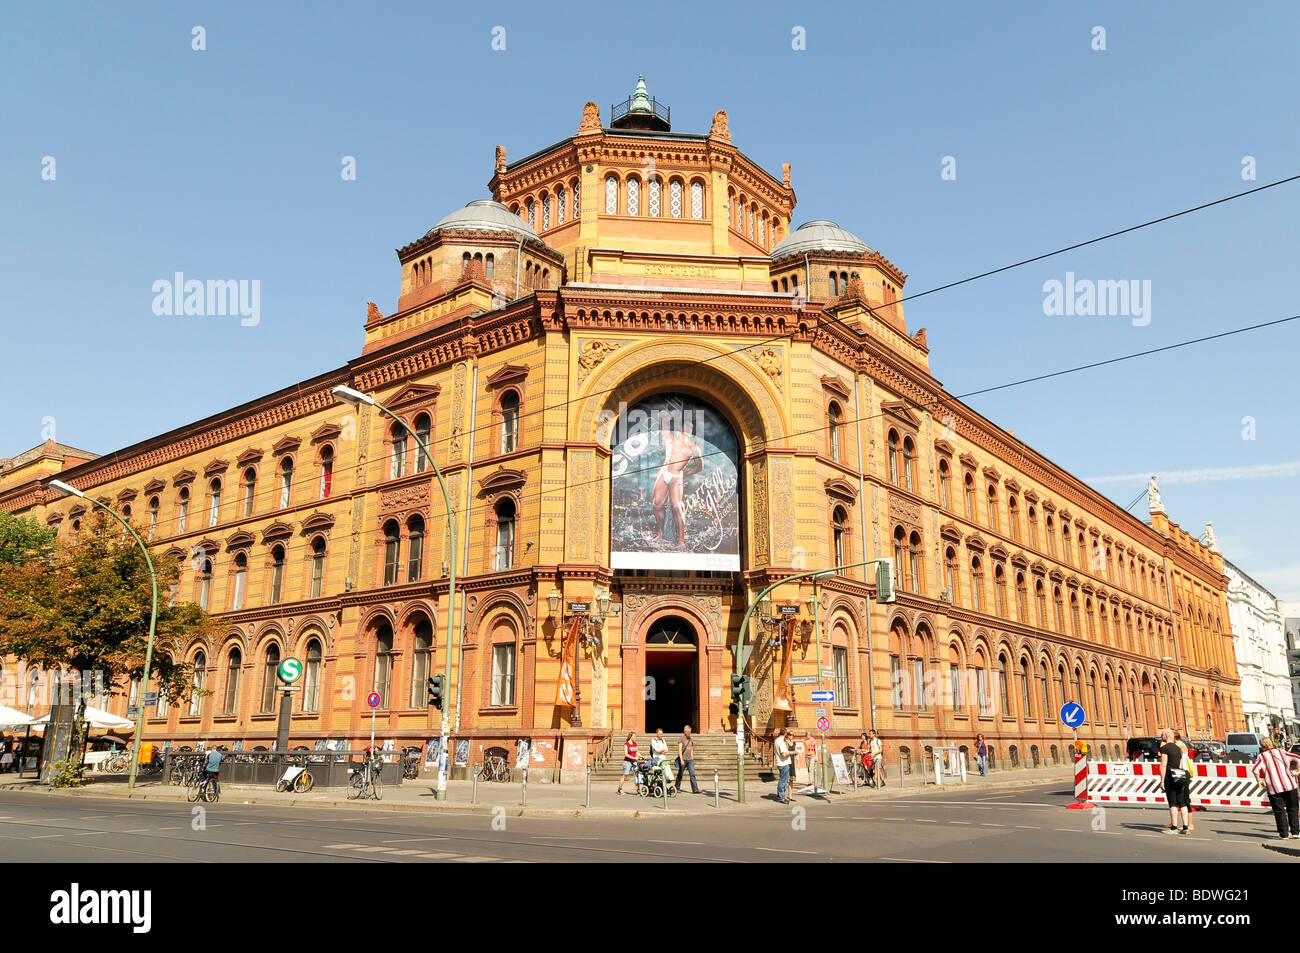 Postfuhramt, Post Office, built in 1875 - 1881, the federal capital, Berlin, Germany, Europe Stock Photo